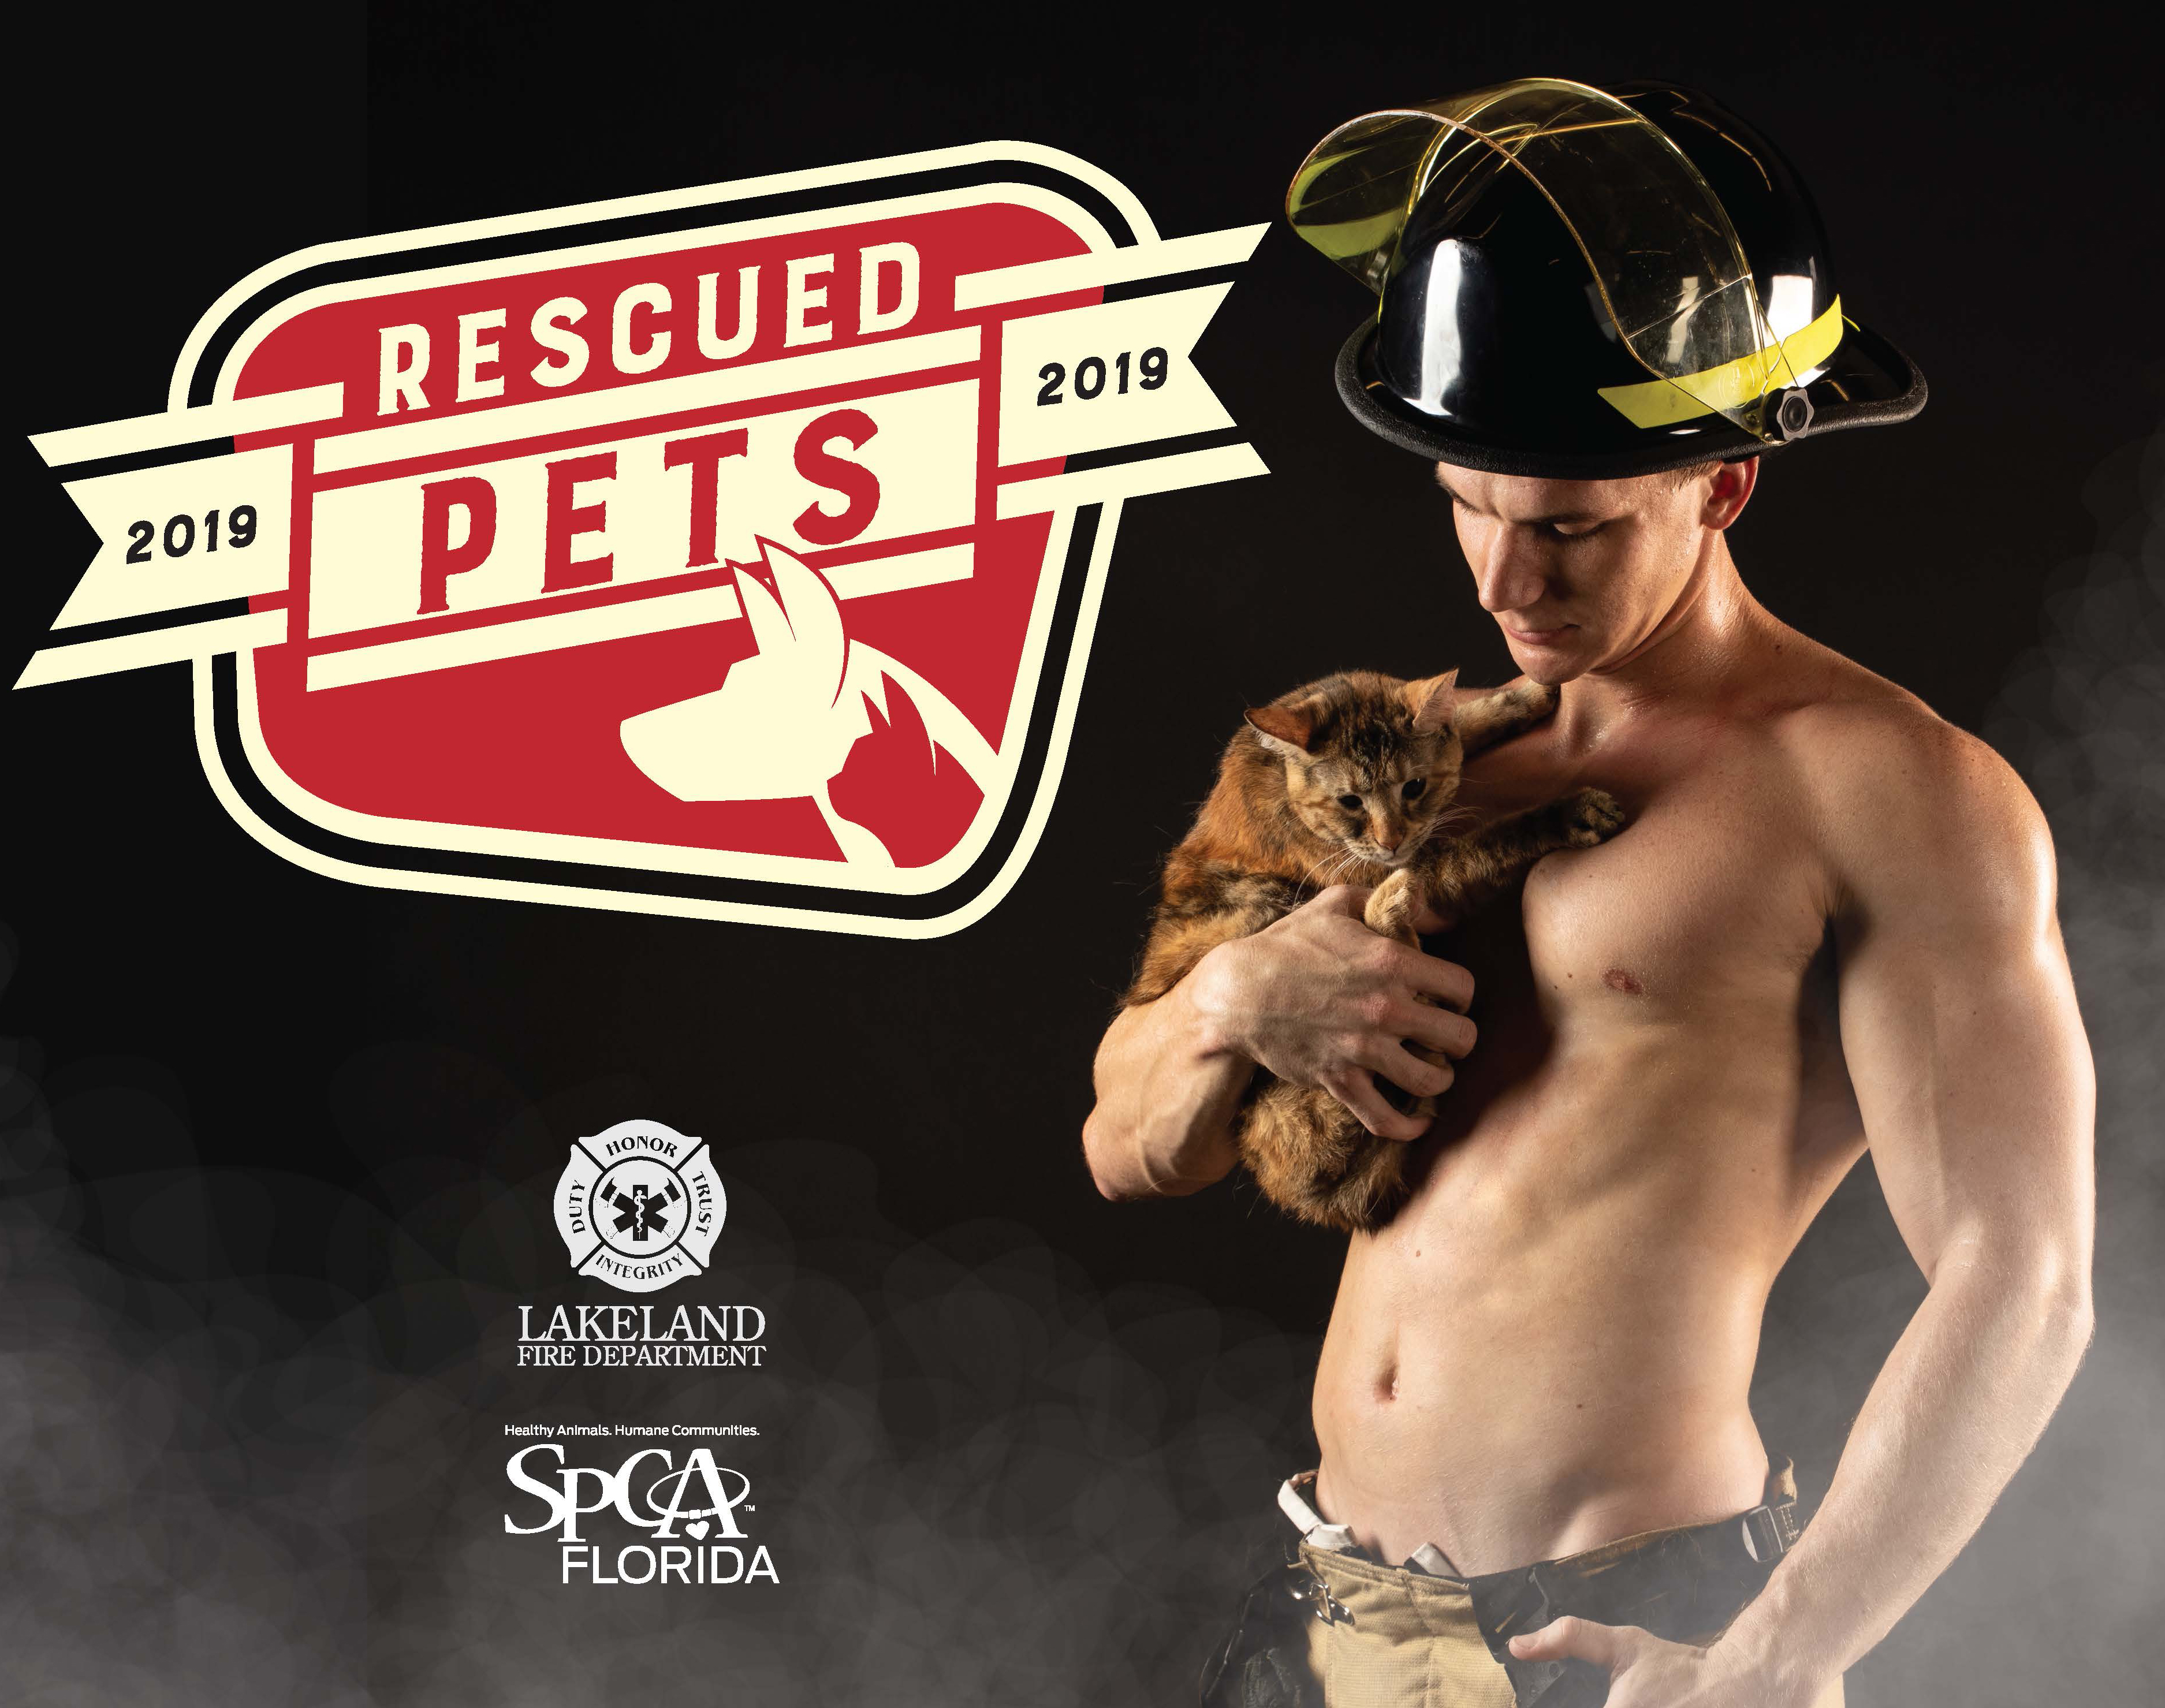 Calendar featuring LFD Firefighters and rescued pets. All proceeds benefit SPCA Florida.